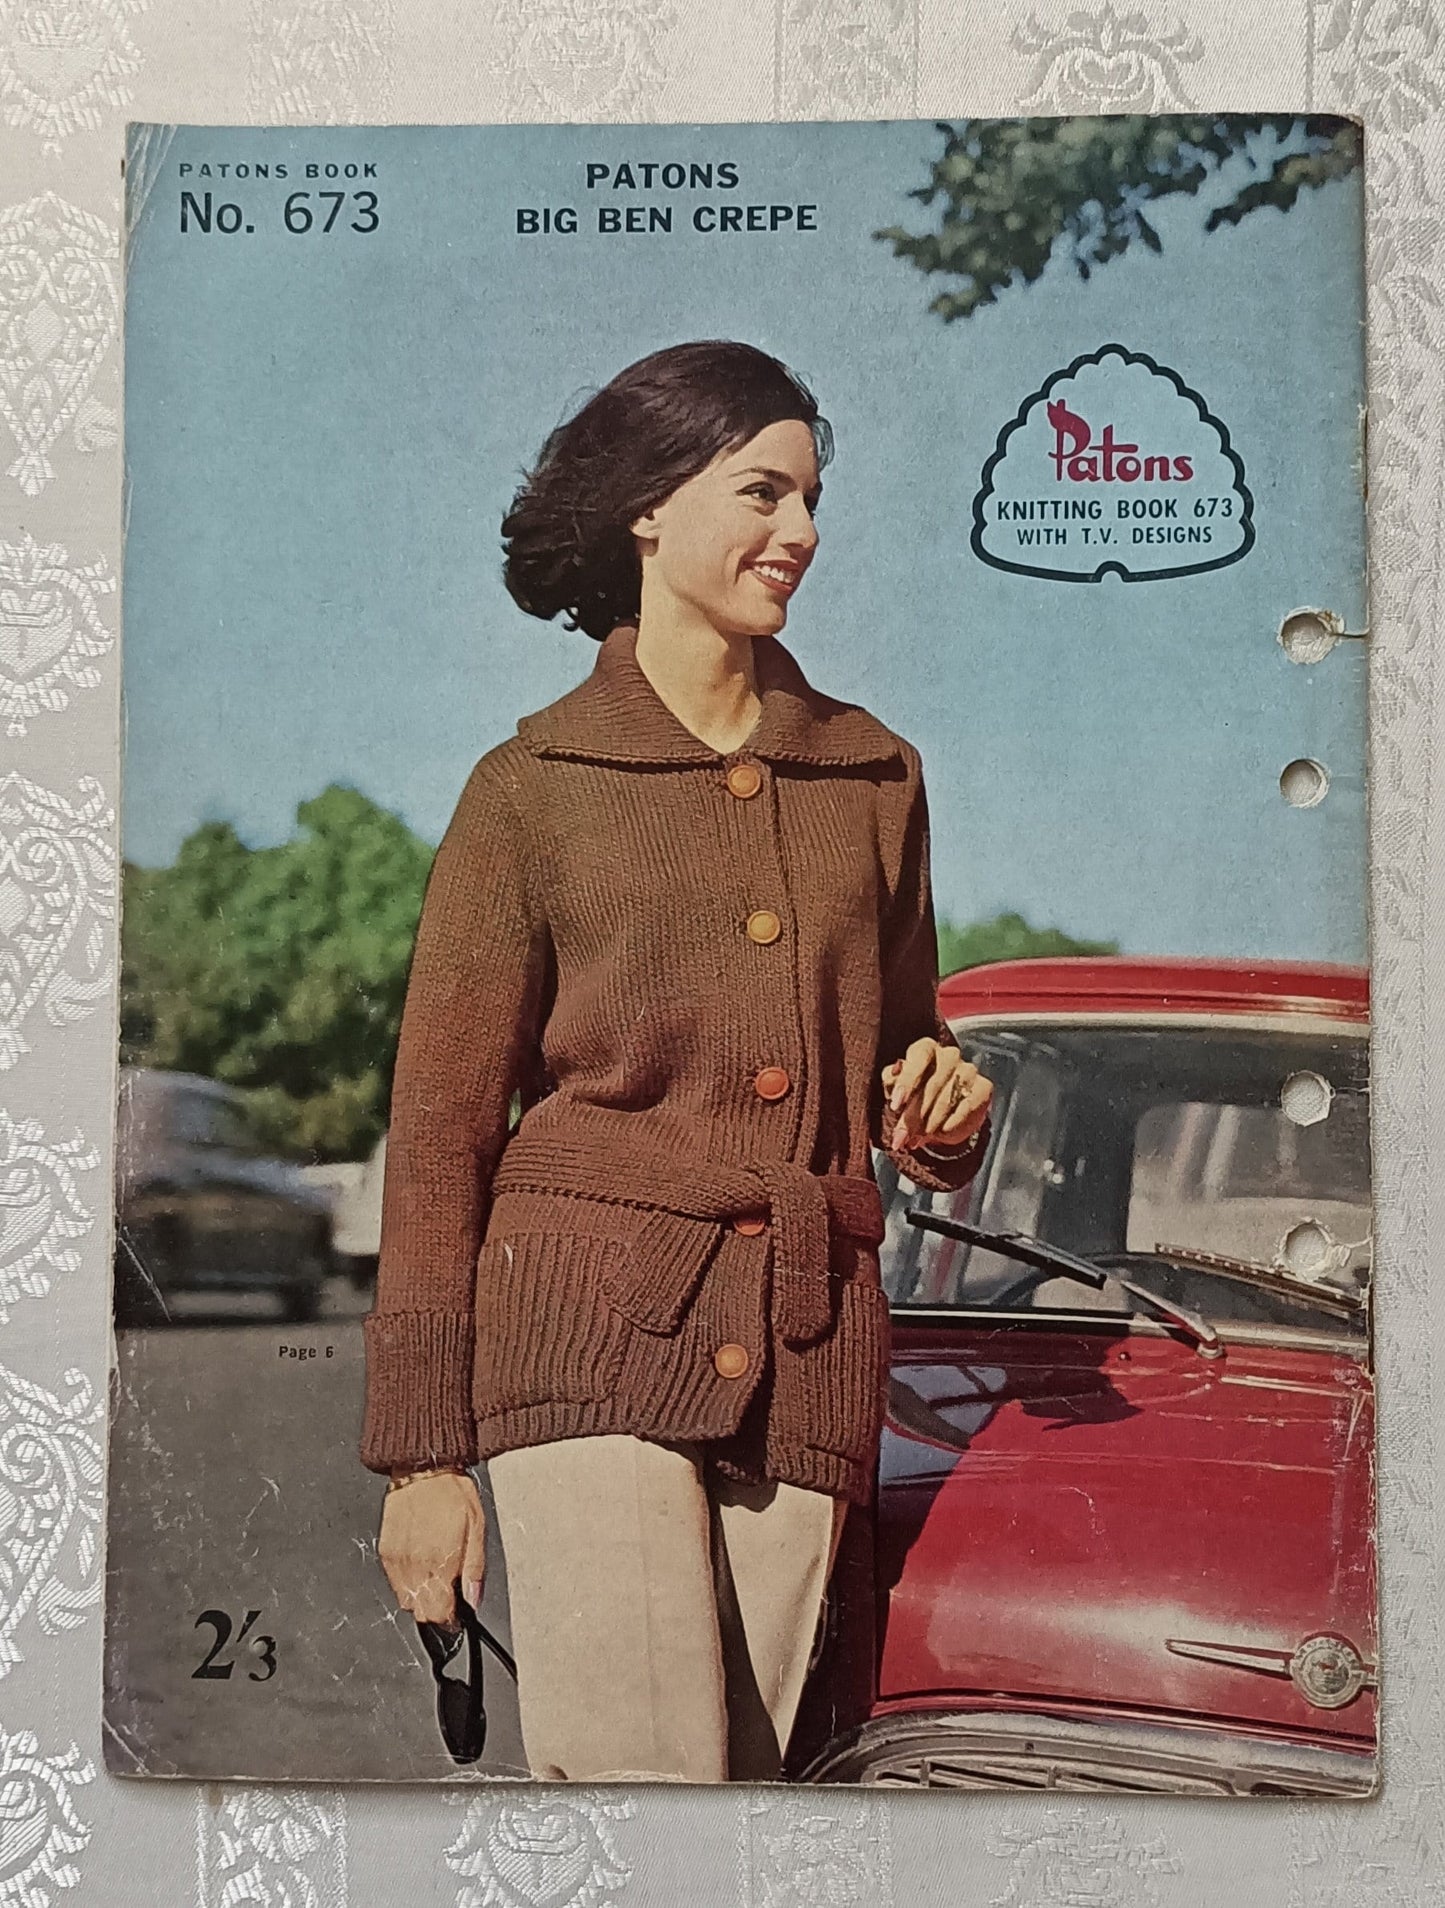 Patons knitting book 673 knitting patterns for women, jumpers and cardigans